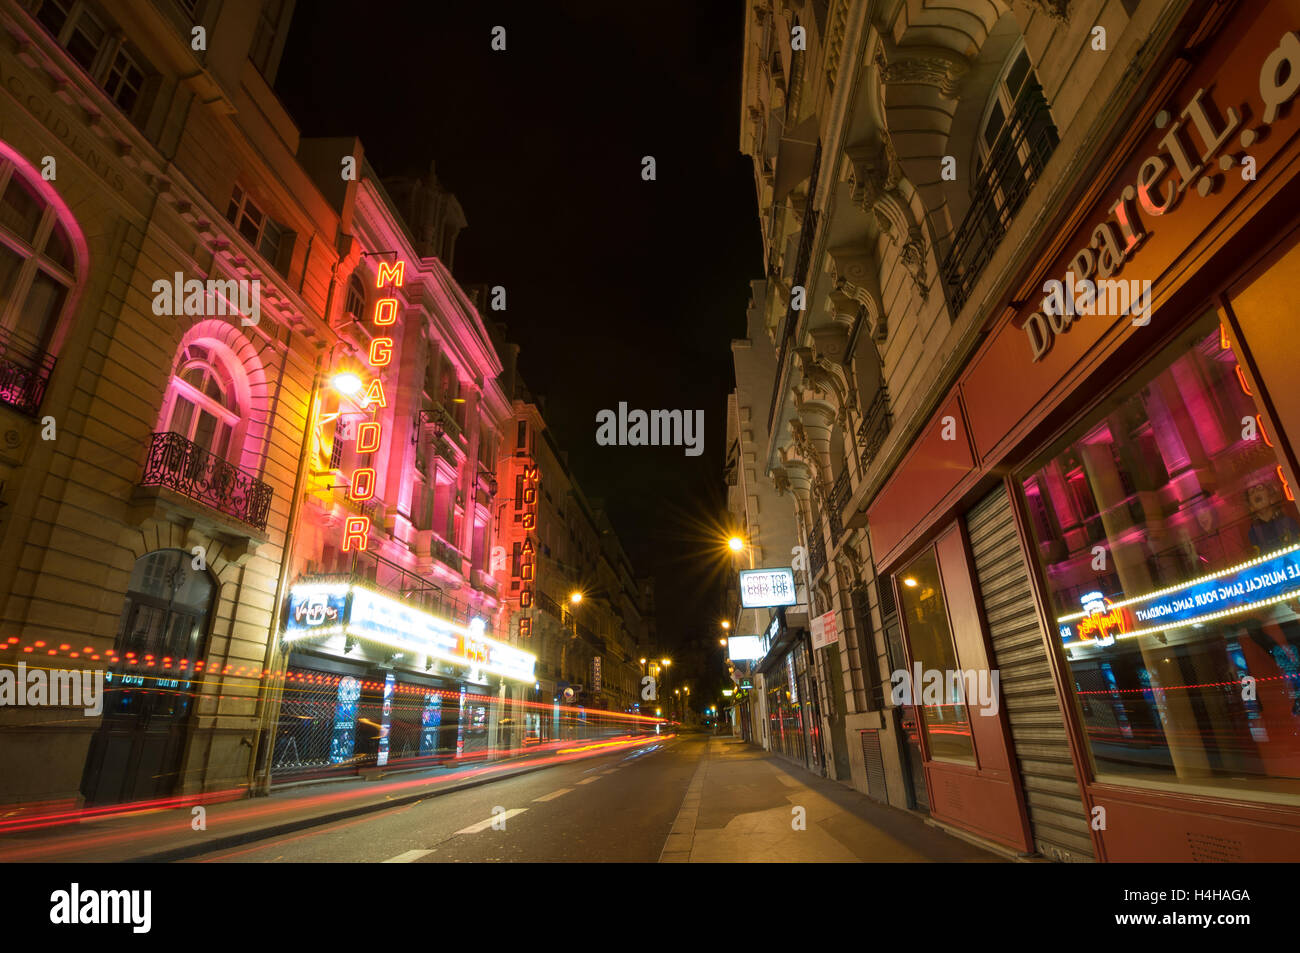 PARIS - SEPT 17, 2014: Traffic lights and night view of the Theatre Megador. Stock Photo